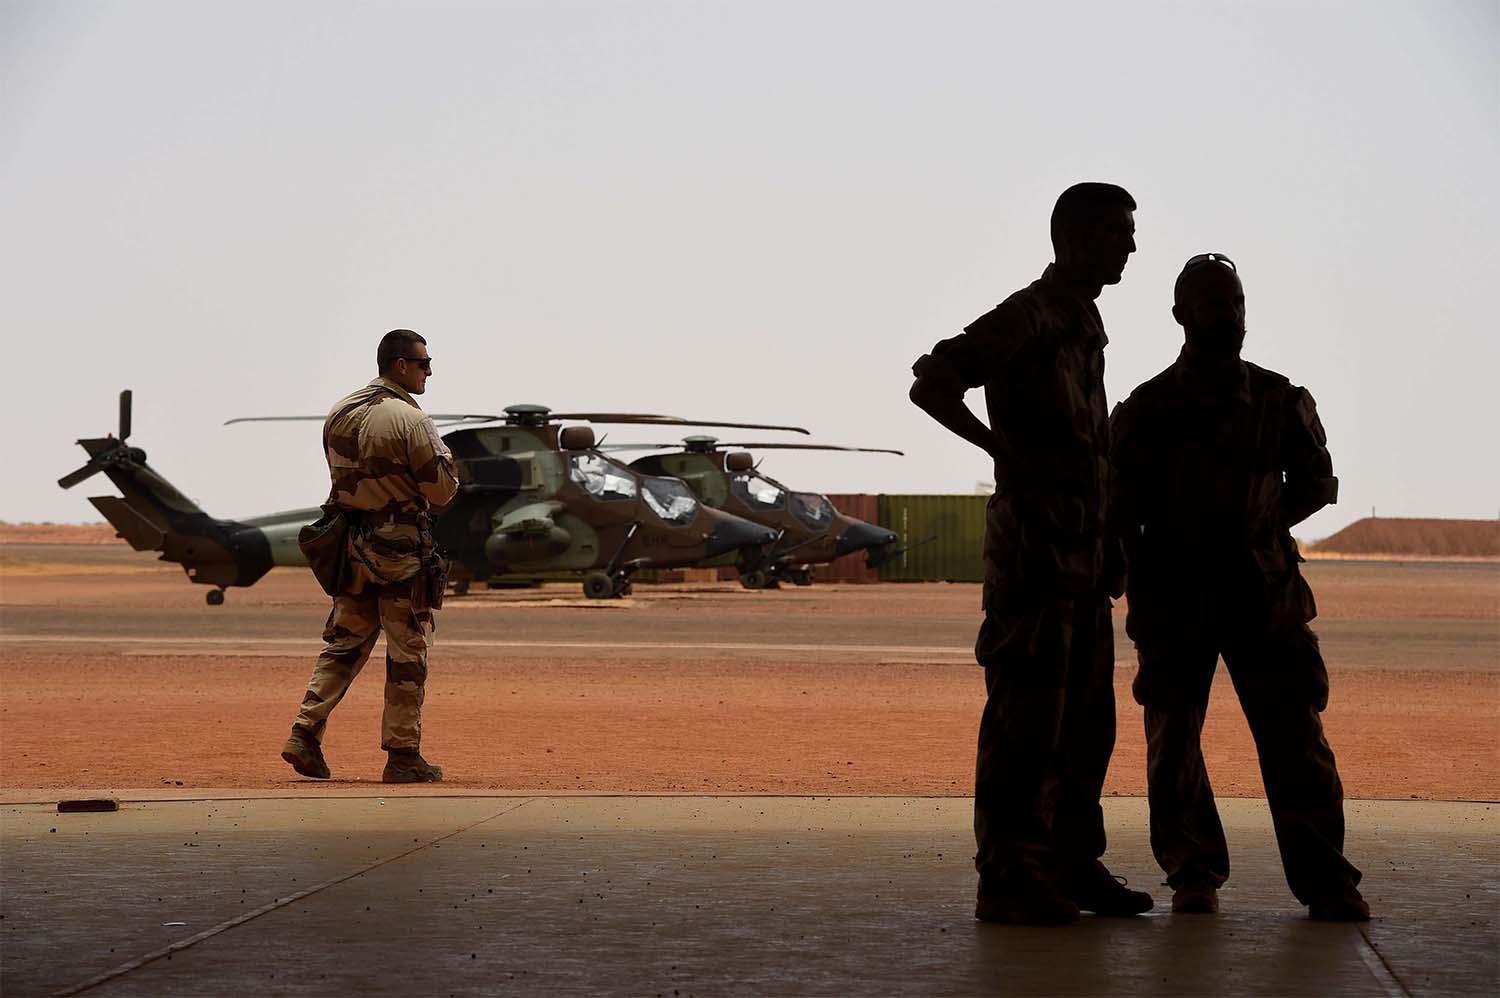 France has more than 5,100 military personnel based in Mali and the West African Sahel region 